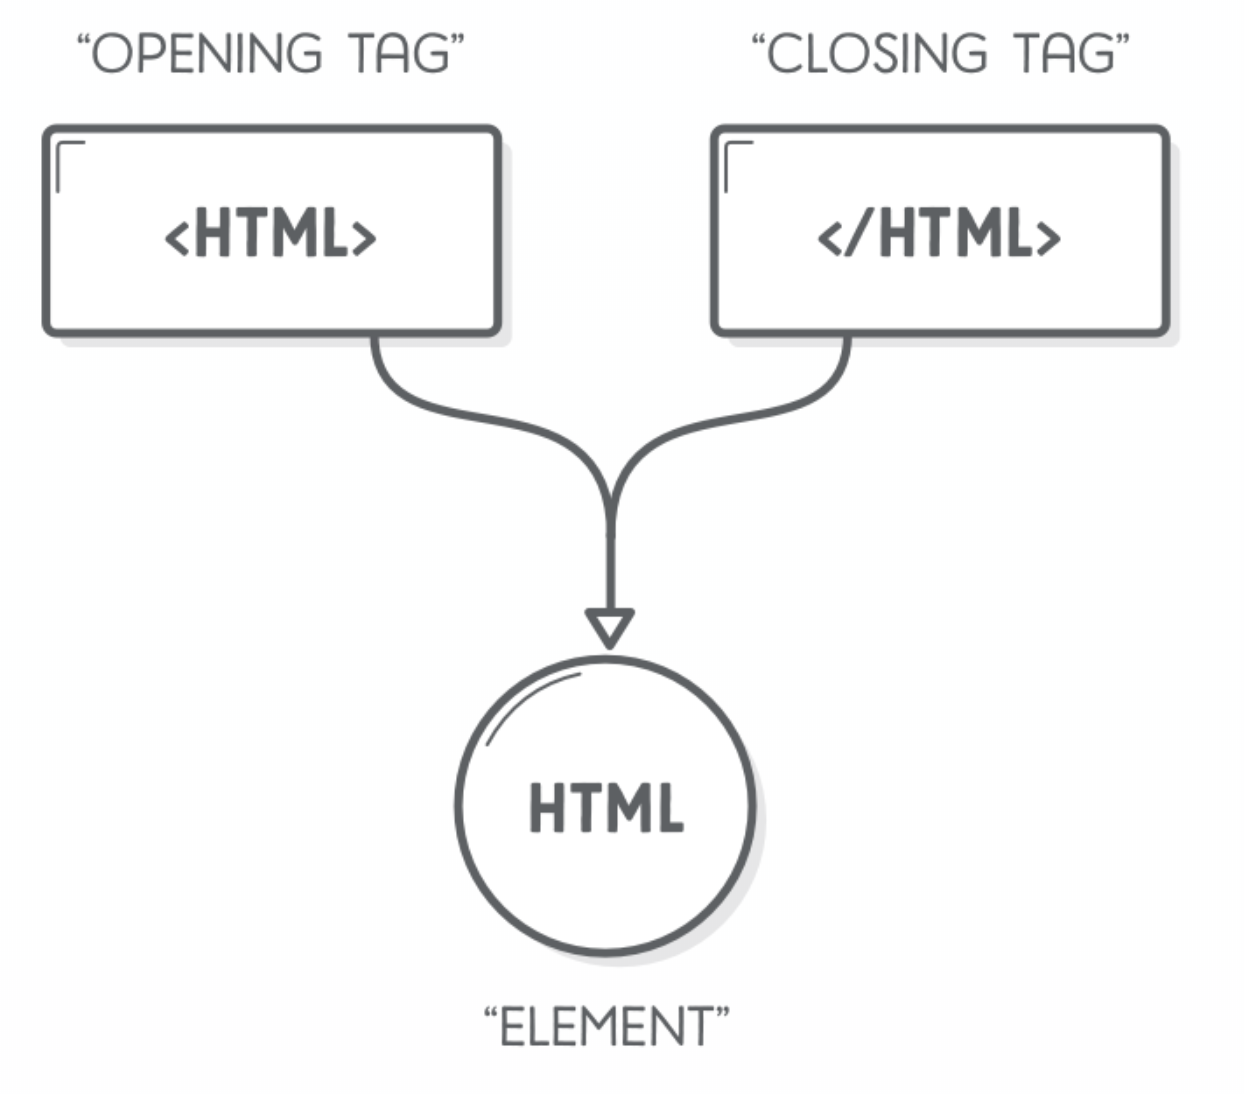 Anatomy of an HTML element